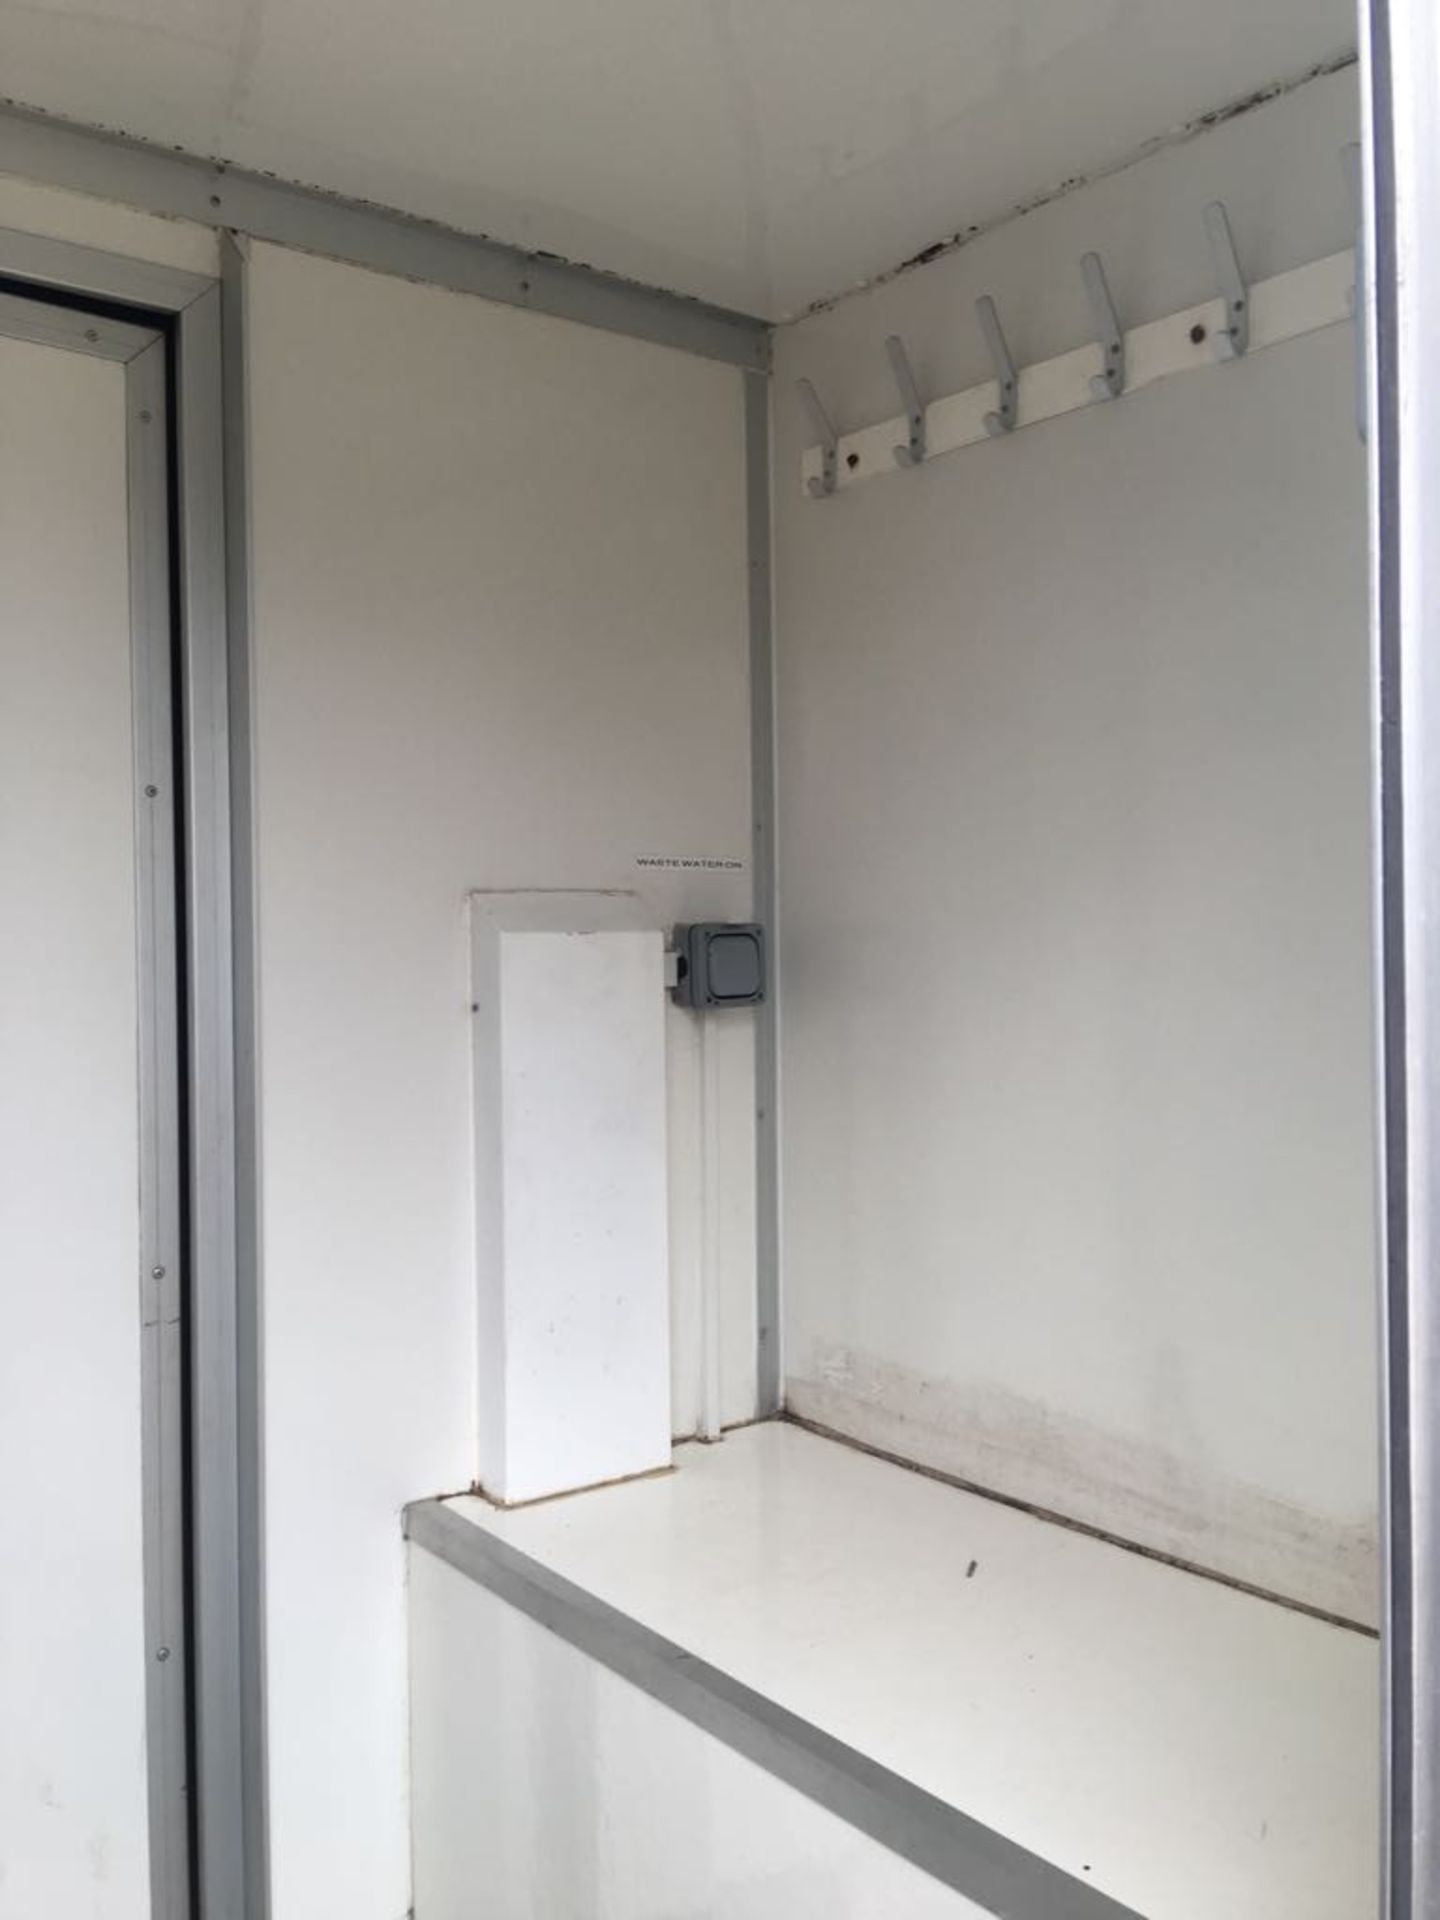 MOBILE TRAILER AMS TWIN SHOWER DECONTAMINATION UNIT AND CHANGING ROOMS - Image 11 of 27